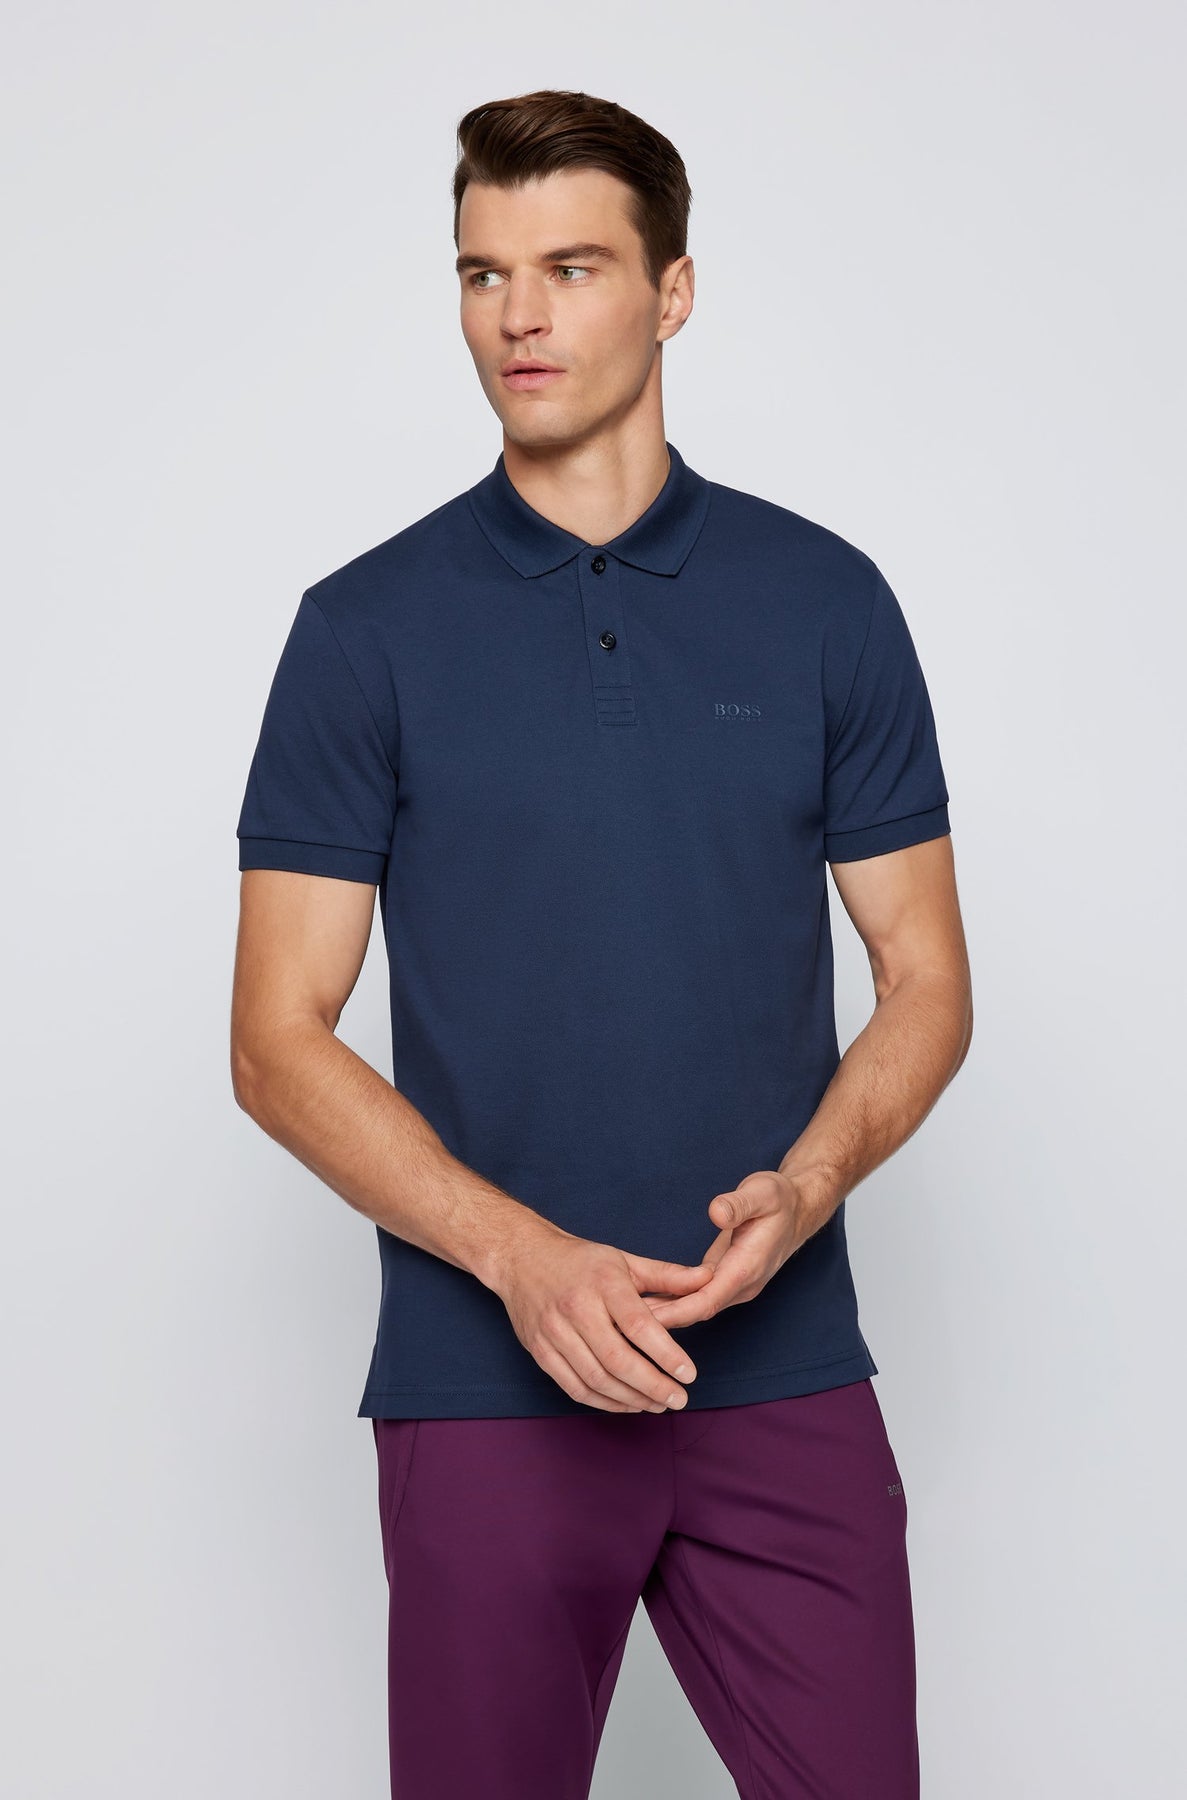 BOSS Regular Fit Polos in Cotton - PIRO 10238735 01-50461693 from ...